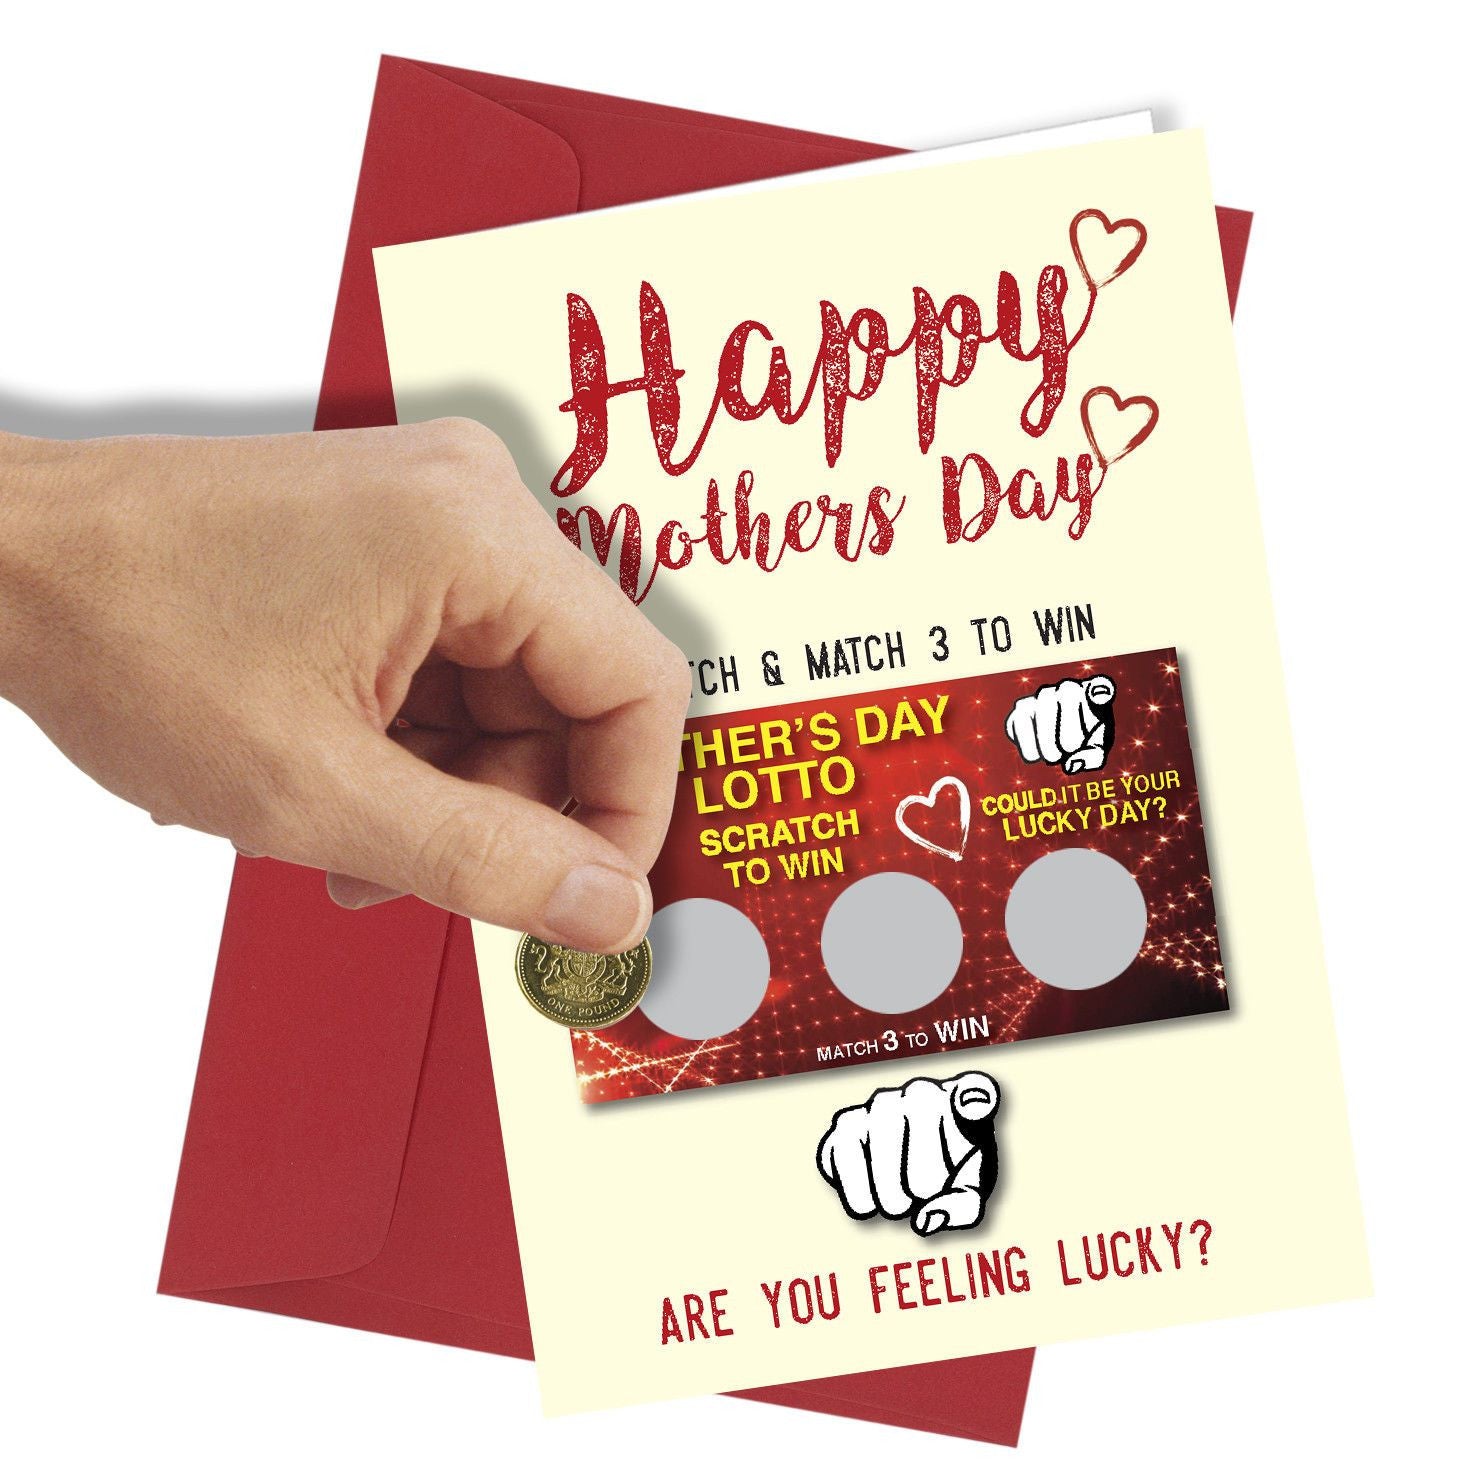 #79 Mother's Day Lotto